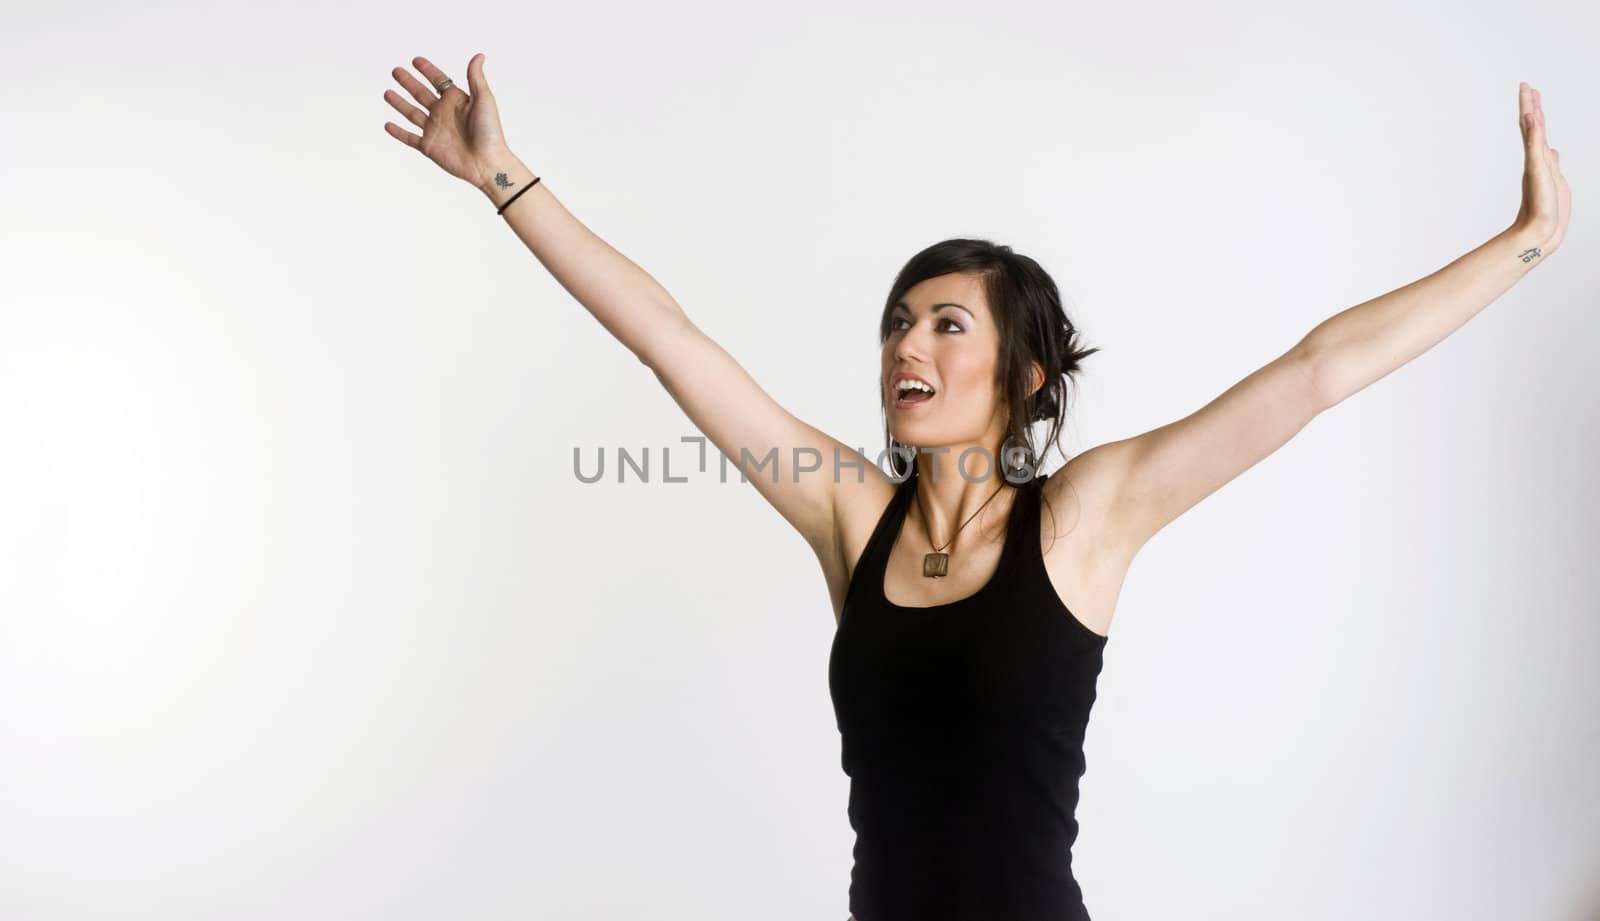 A woman holds her hands up and out to welcome the energy